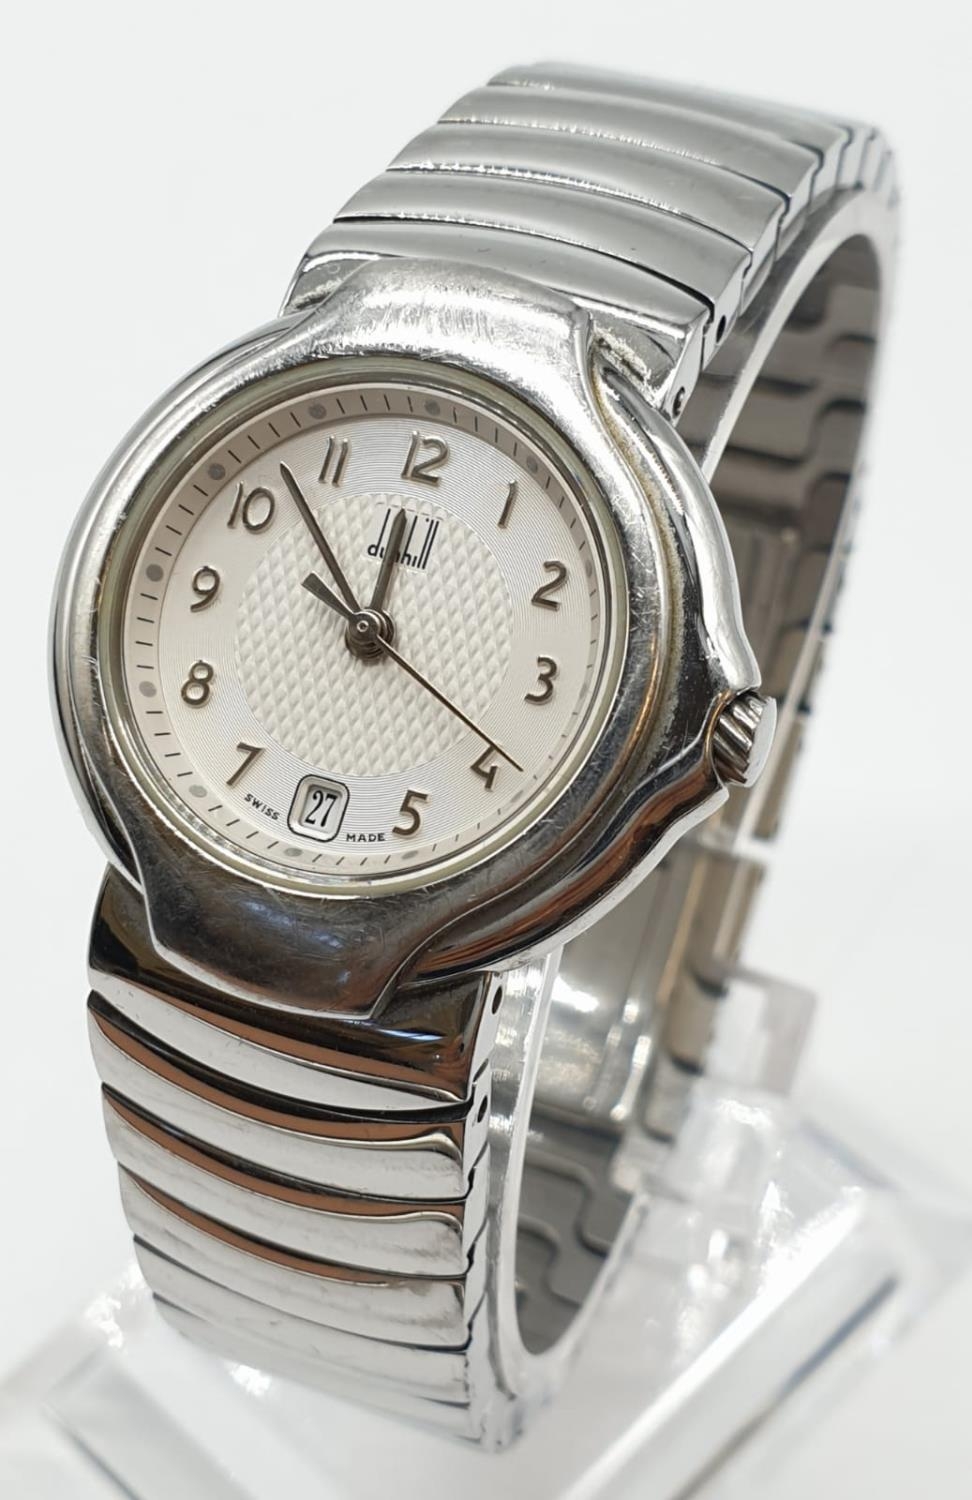 Ladies New Dunhill Watch with Metal Strap. - Image 3 of 8